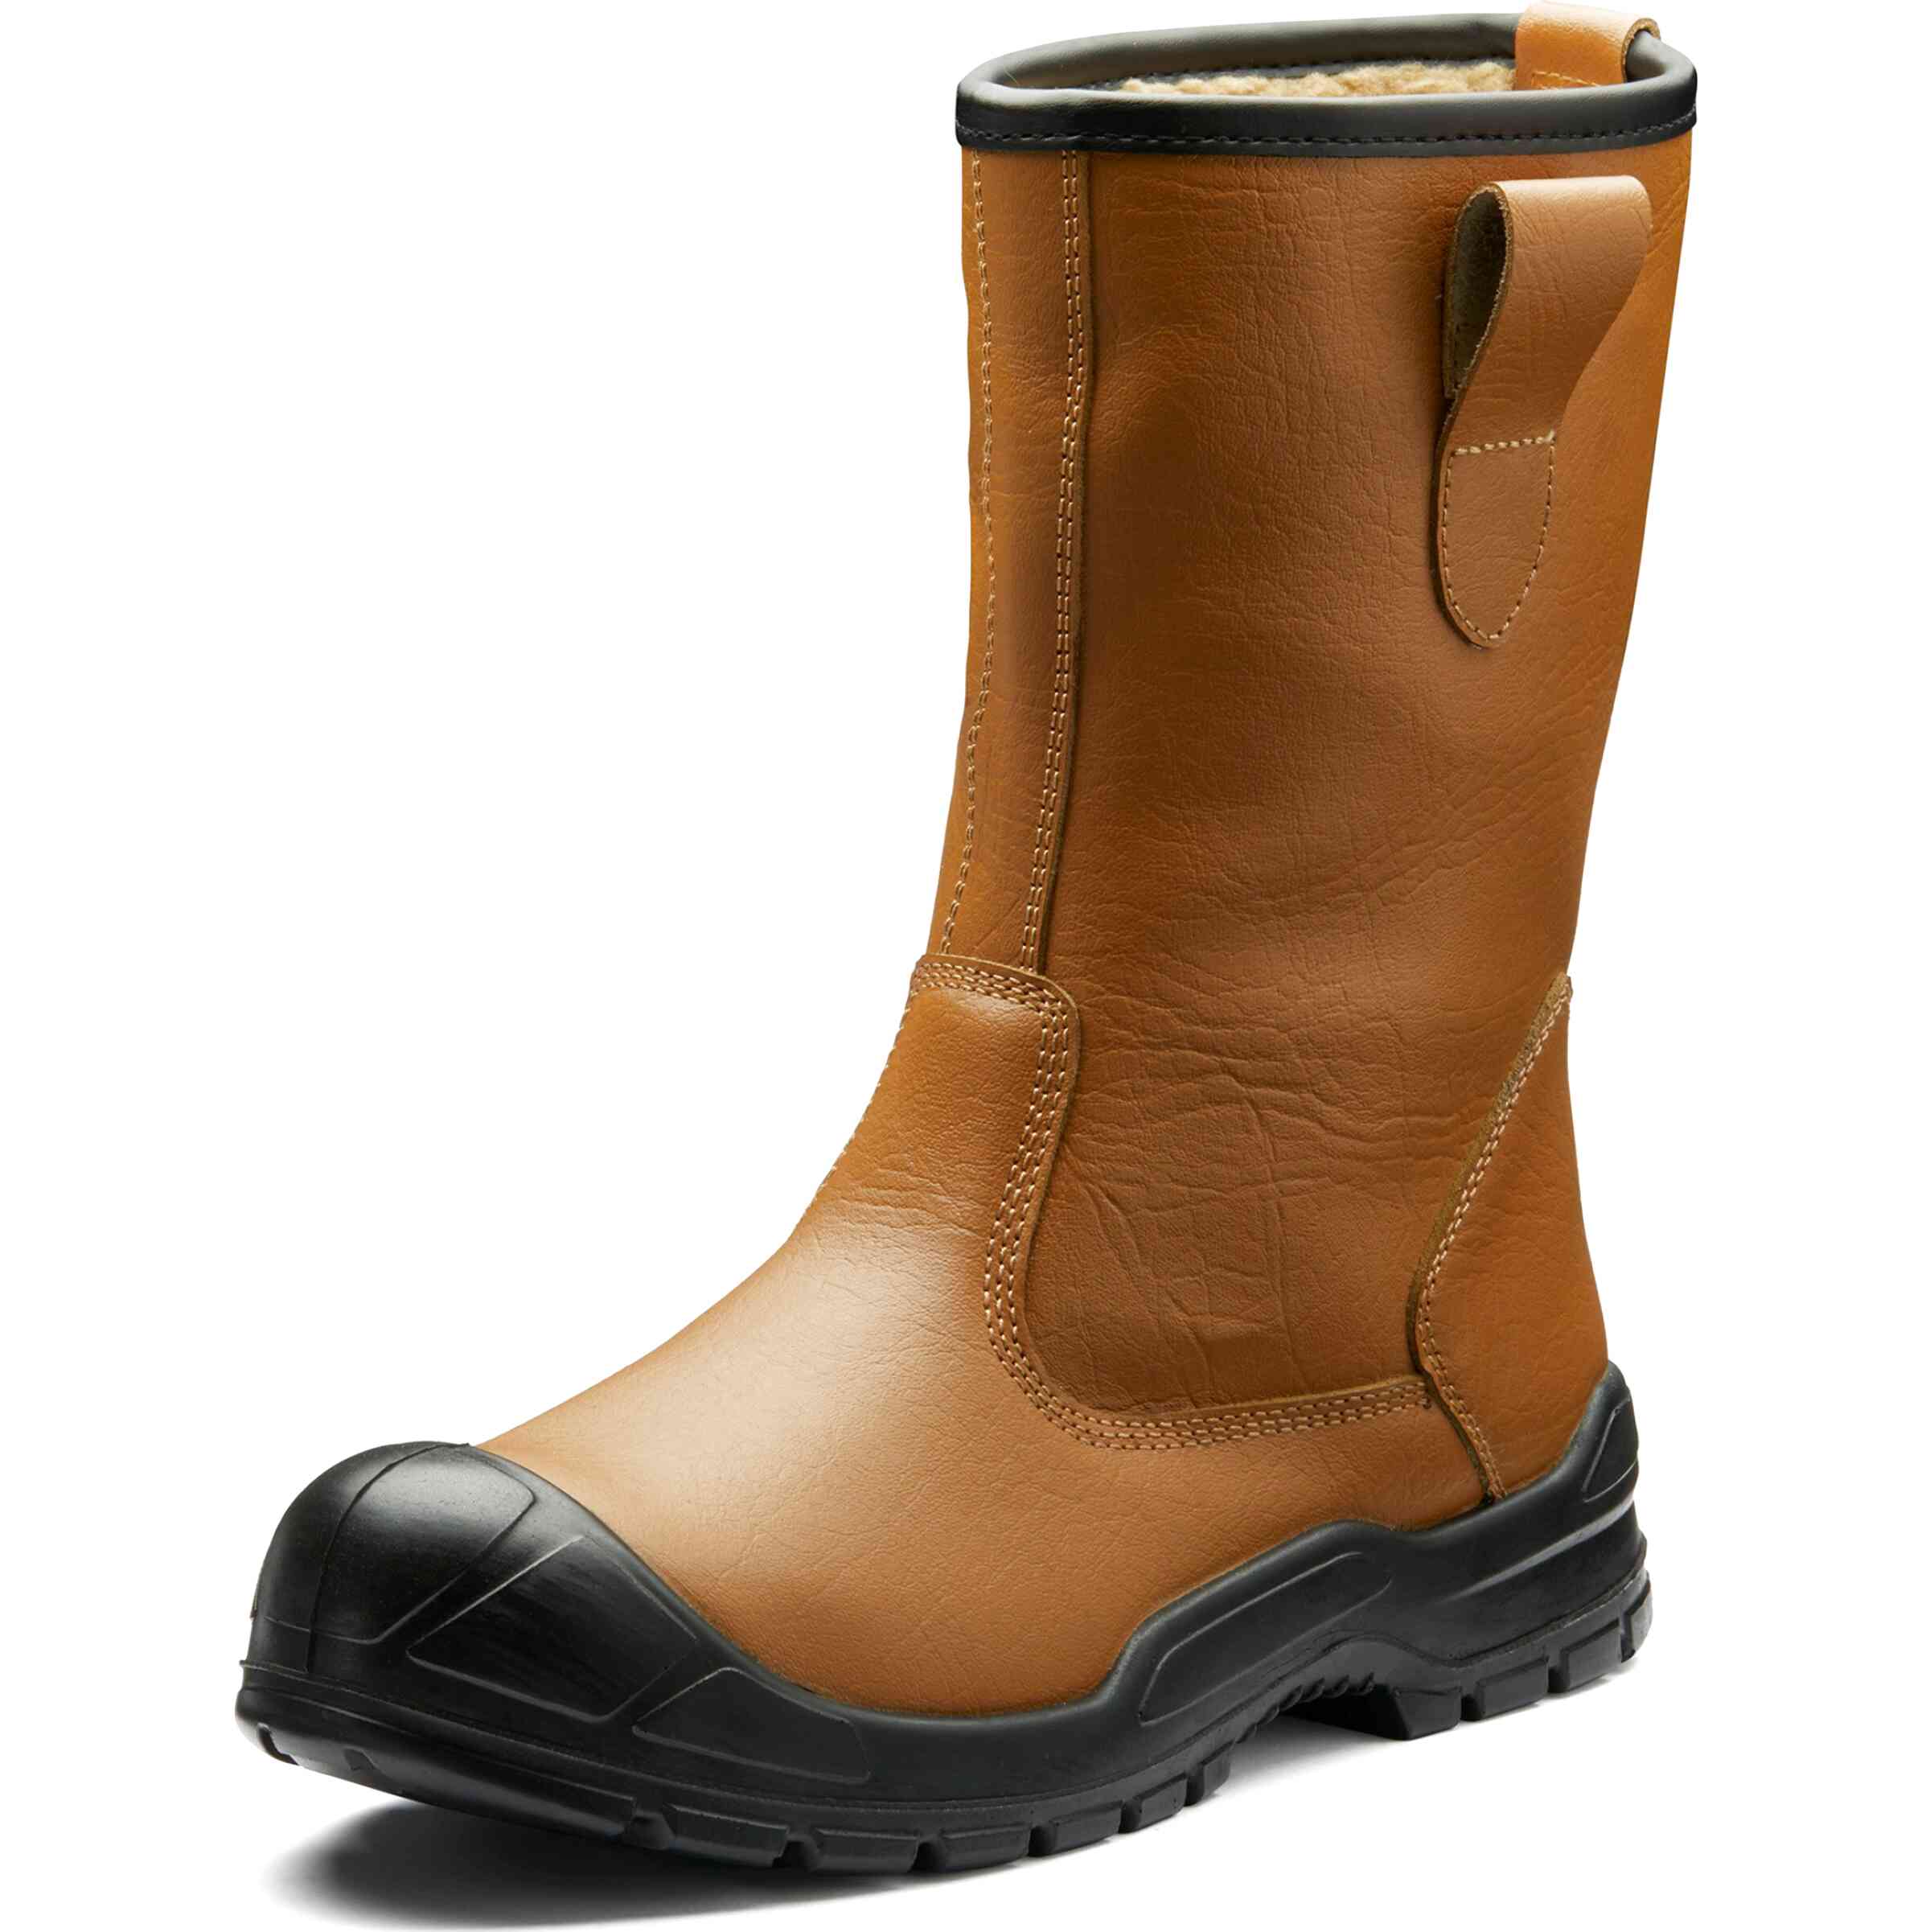 dickies groundwater safety rigger boots